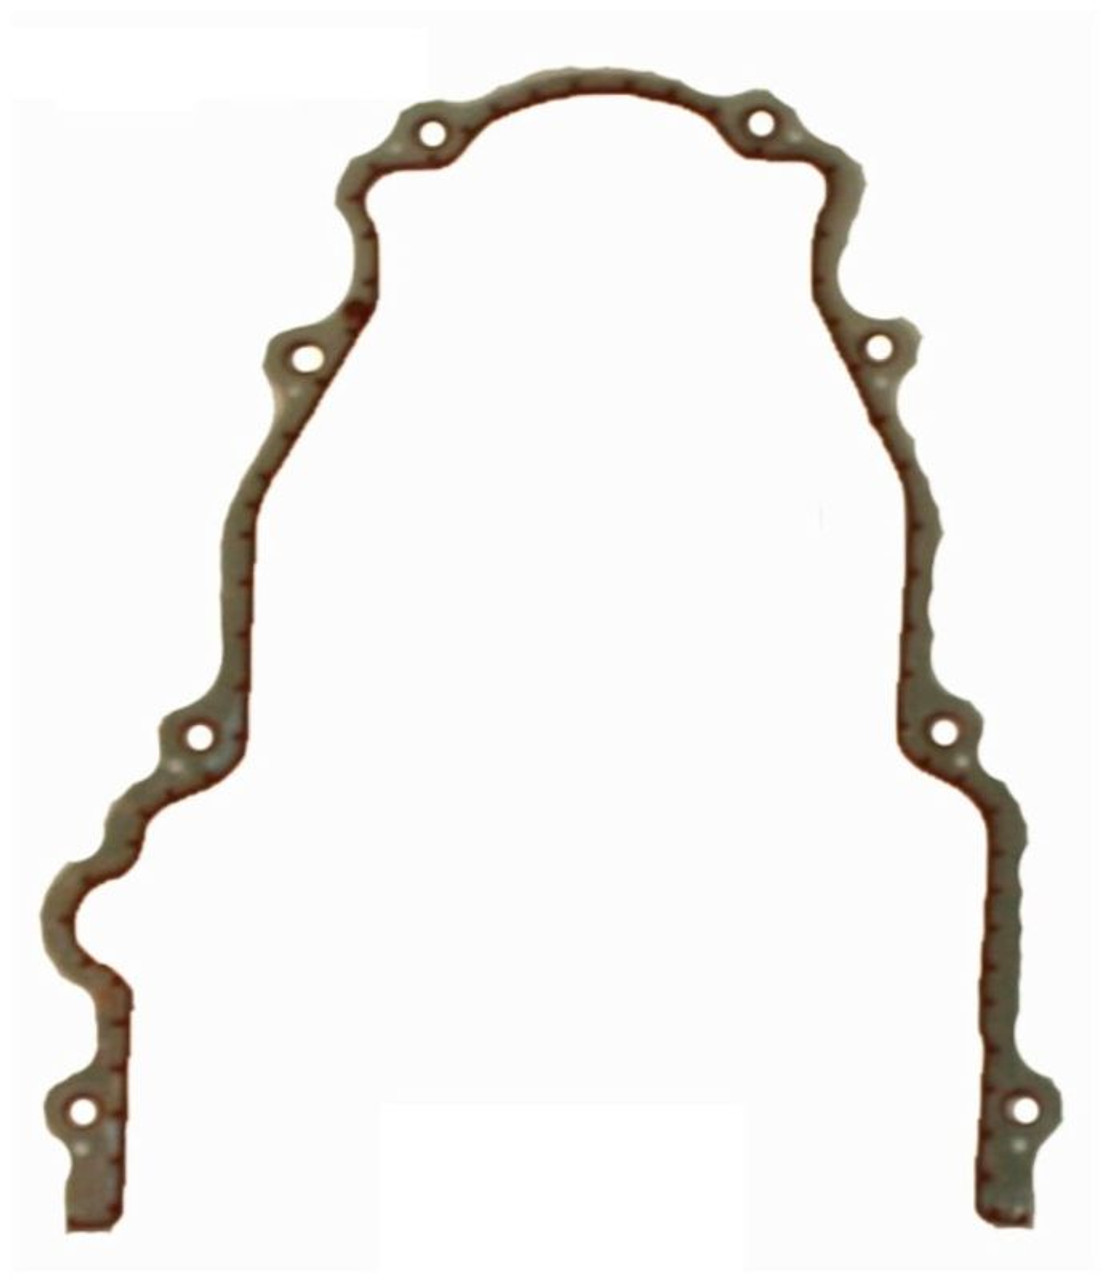 2004 Chevrolet SSR 5.3L Engine Timing Cover Gasket TCG293-A -202